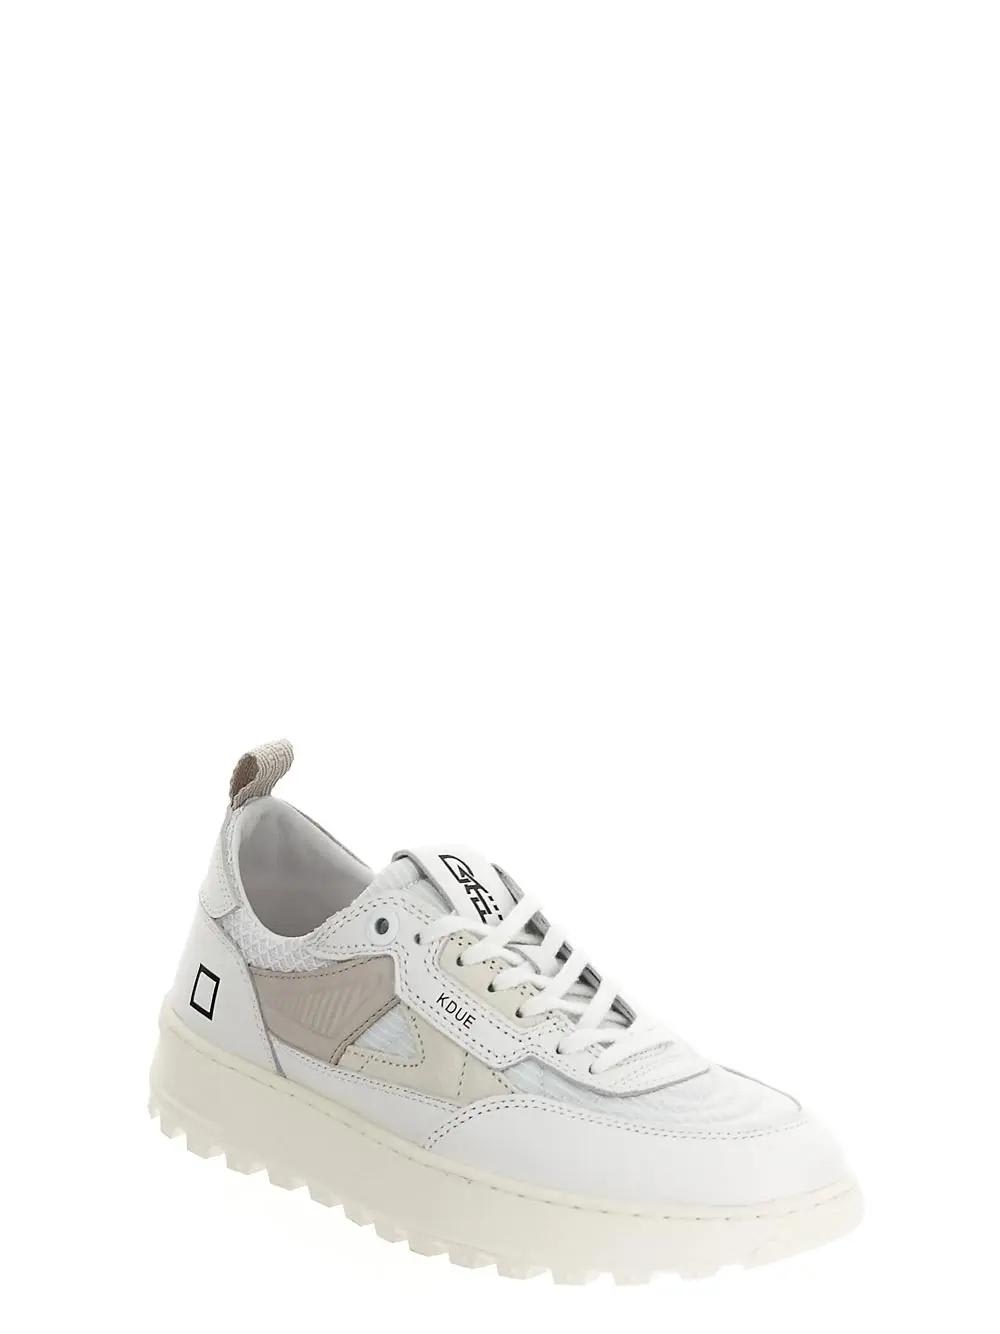 Shop Date Hybrid Sneakers In White